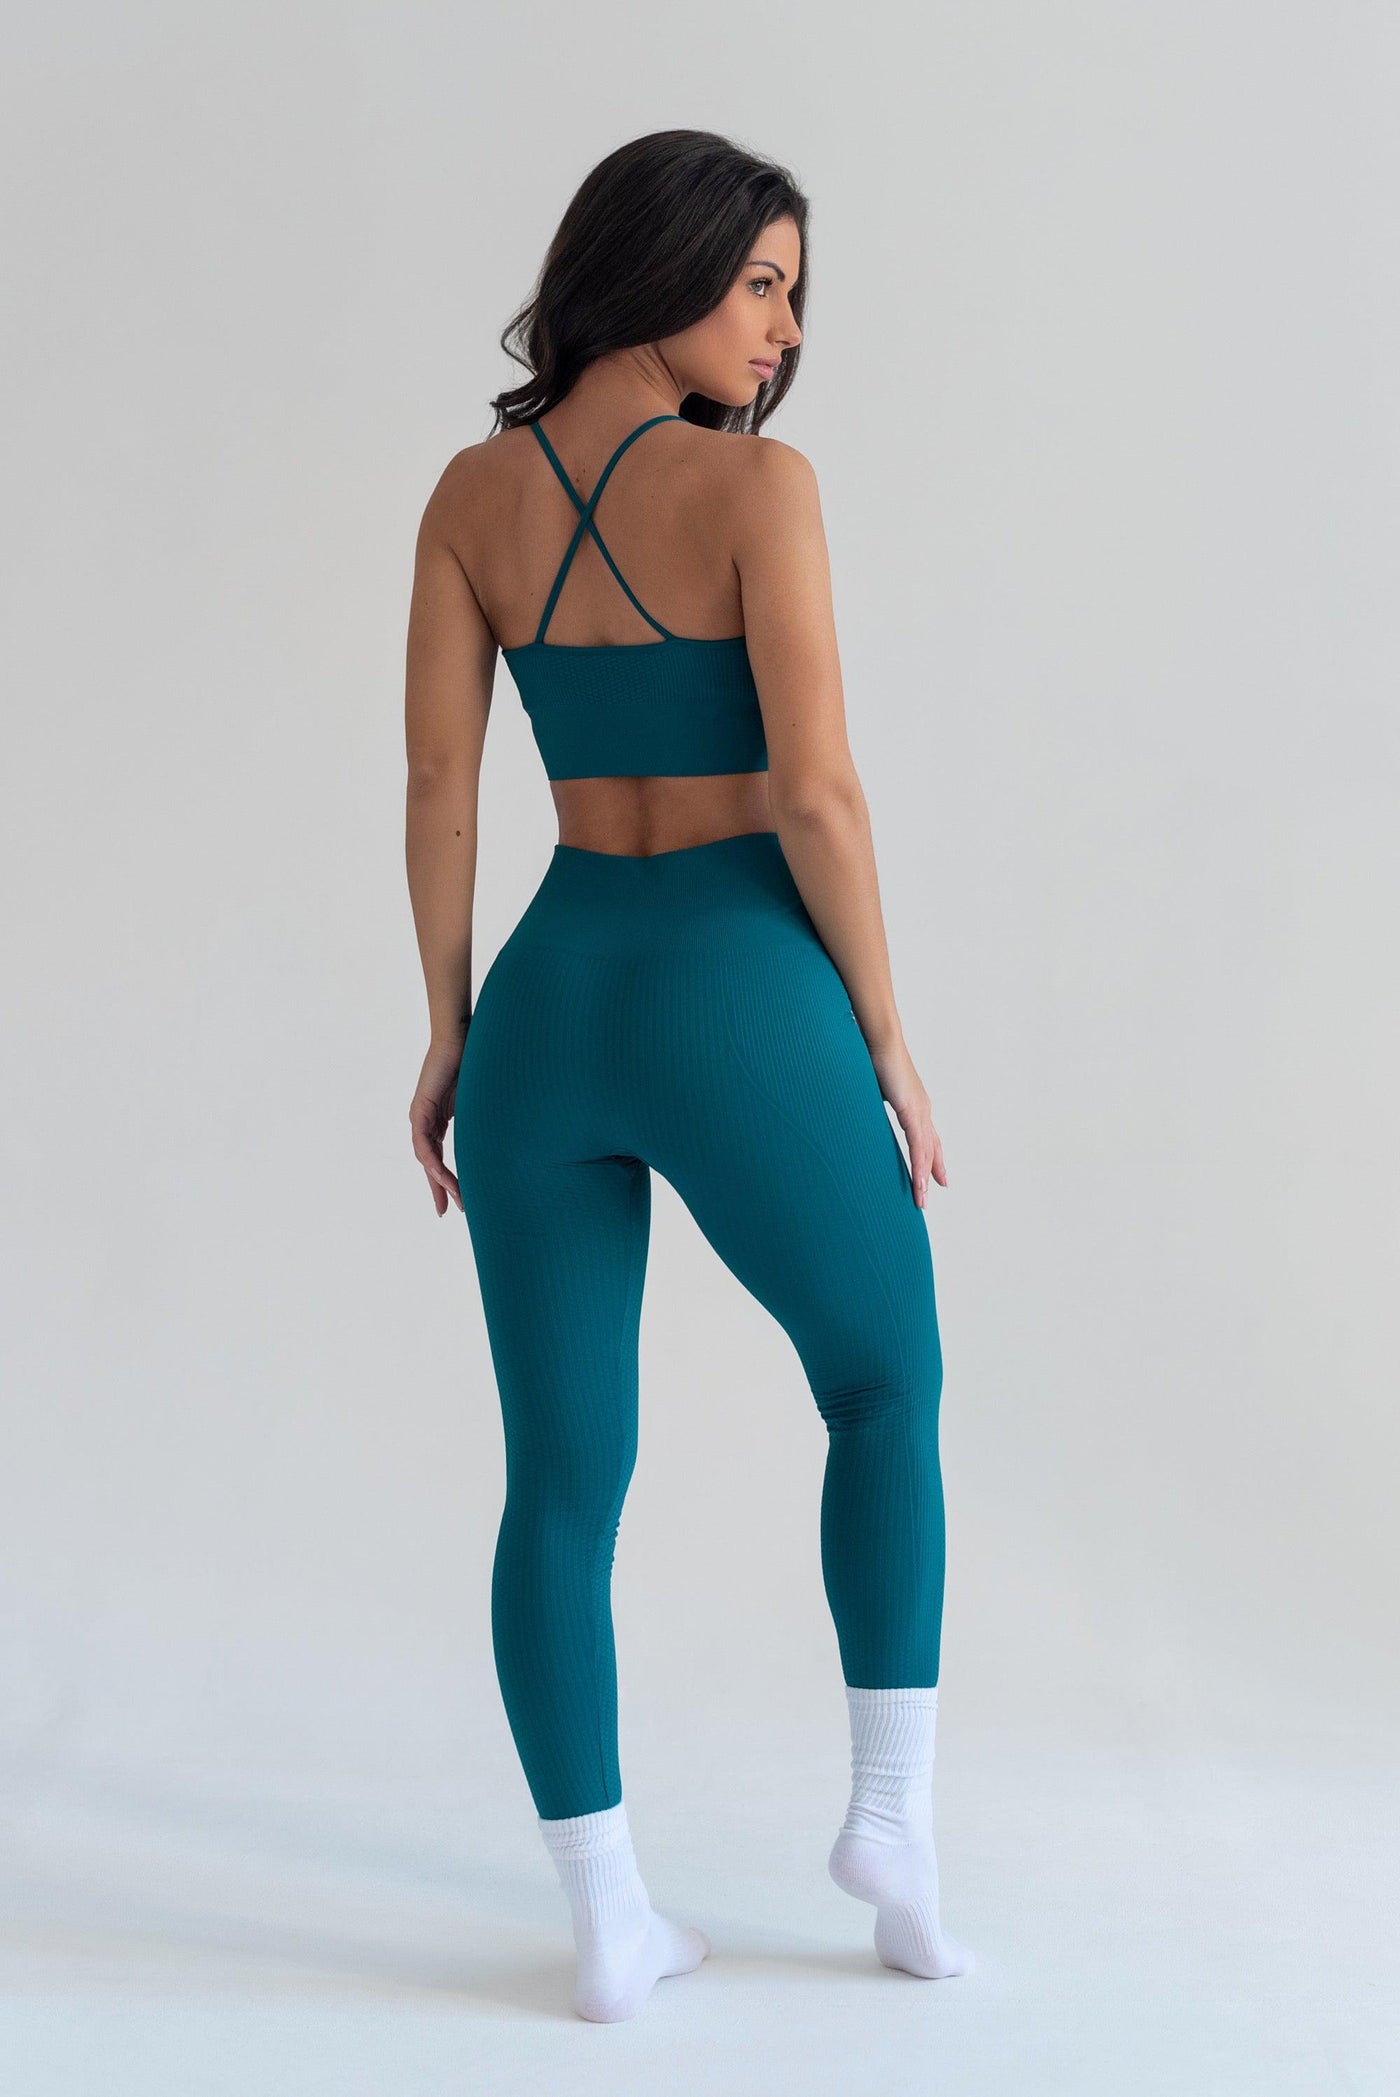 Flow Legging in Aqua Green-Long Leggings-Store Clothing Sustainable Recycled Yoga Leggings Women On-line Barcelona Believe Athletics Sustainable Recycled Yoga Clothes